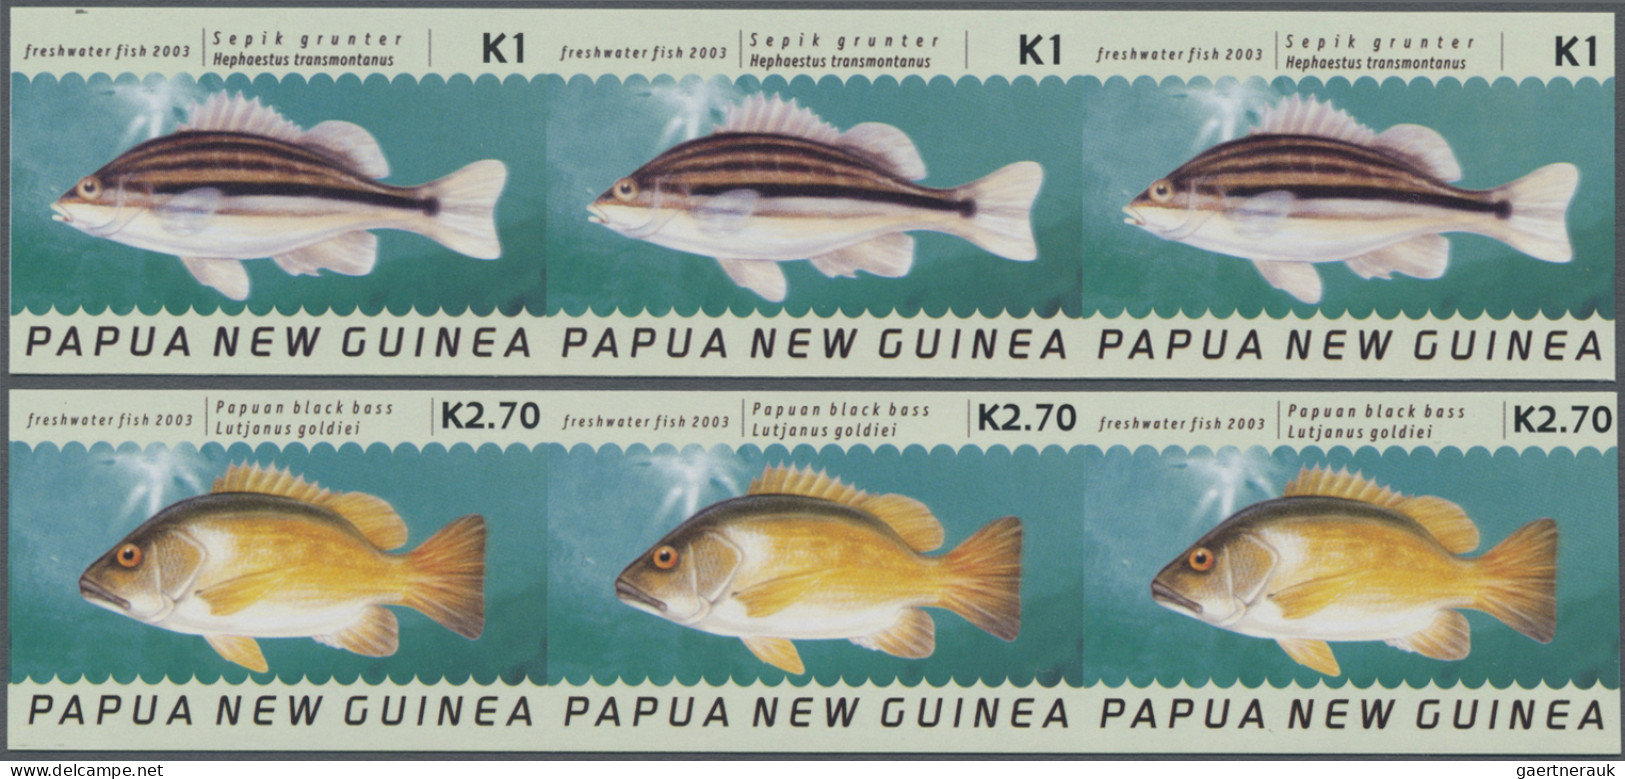 Papua New Guinea: 2003/2005. Collection containing 655 IMPERFORATE stamps and 5